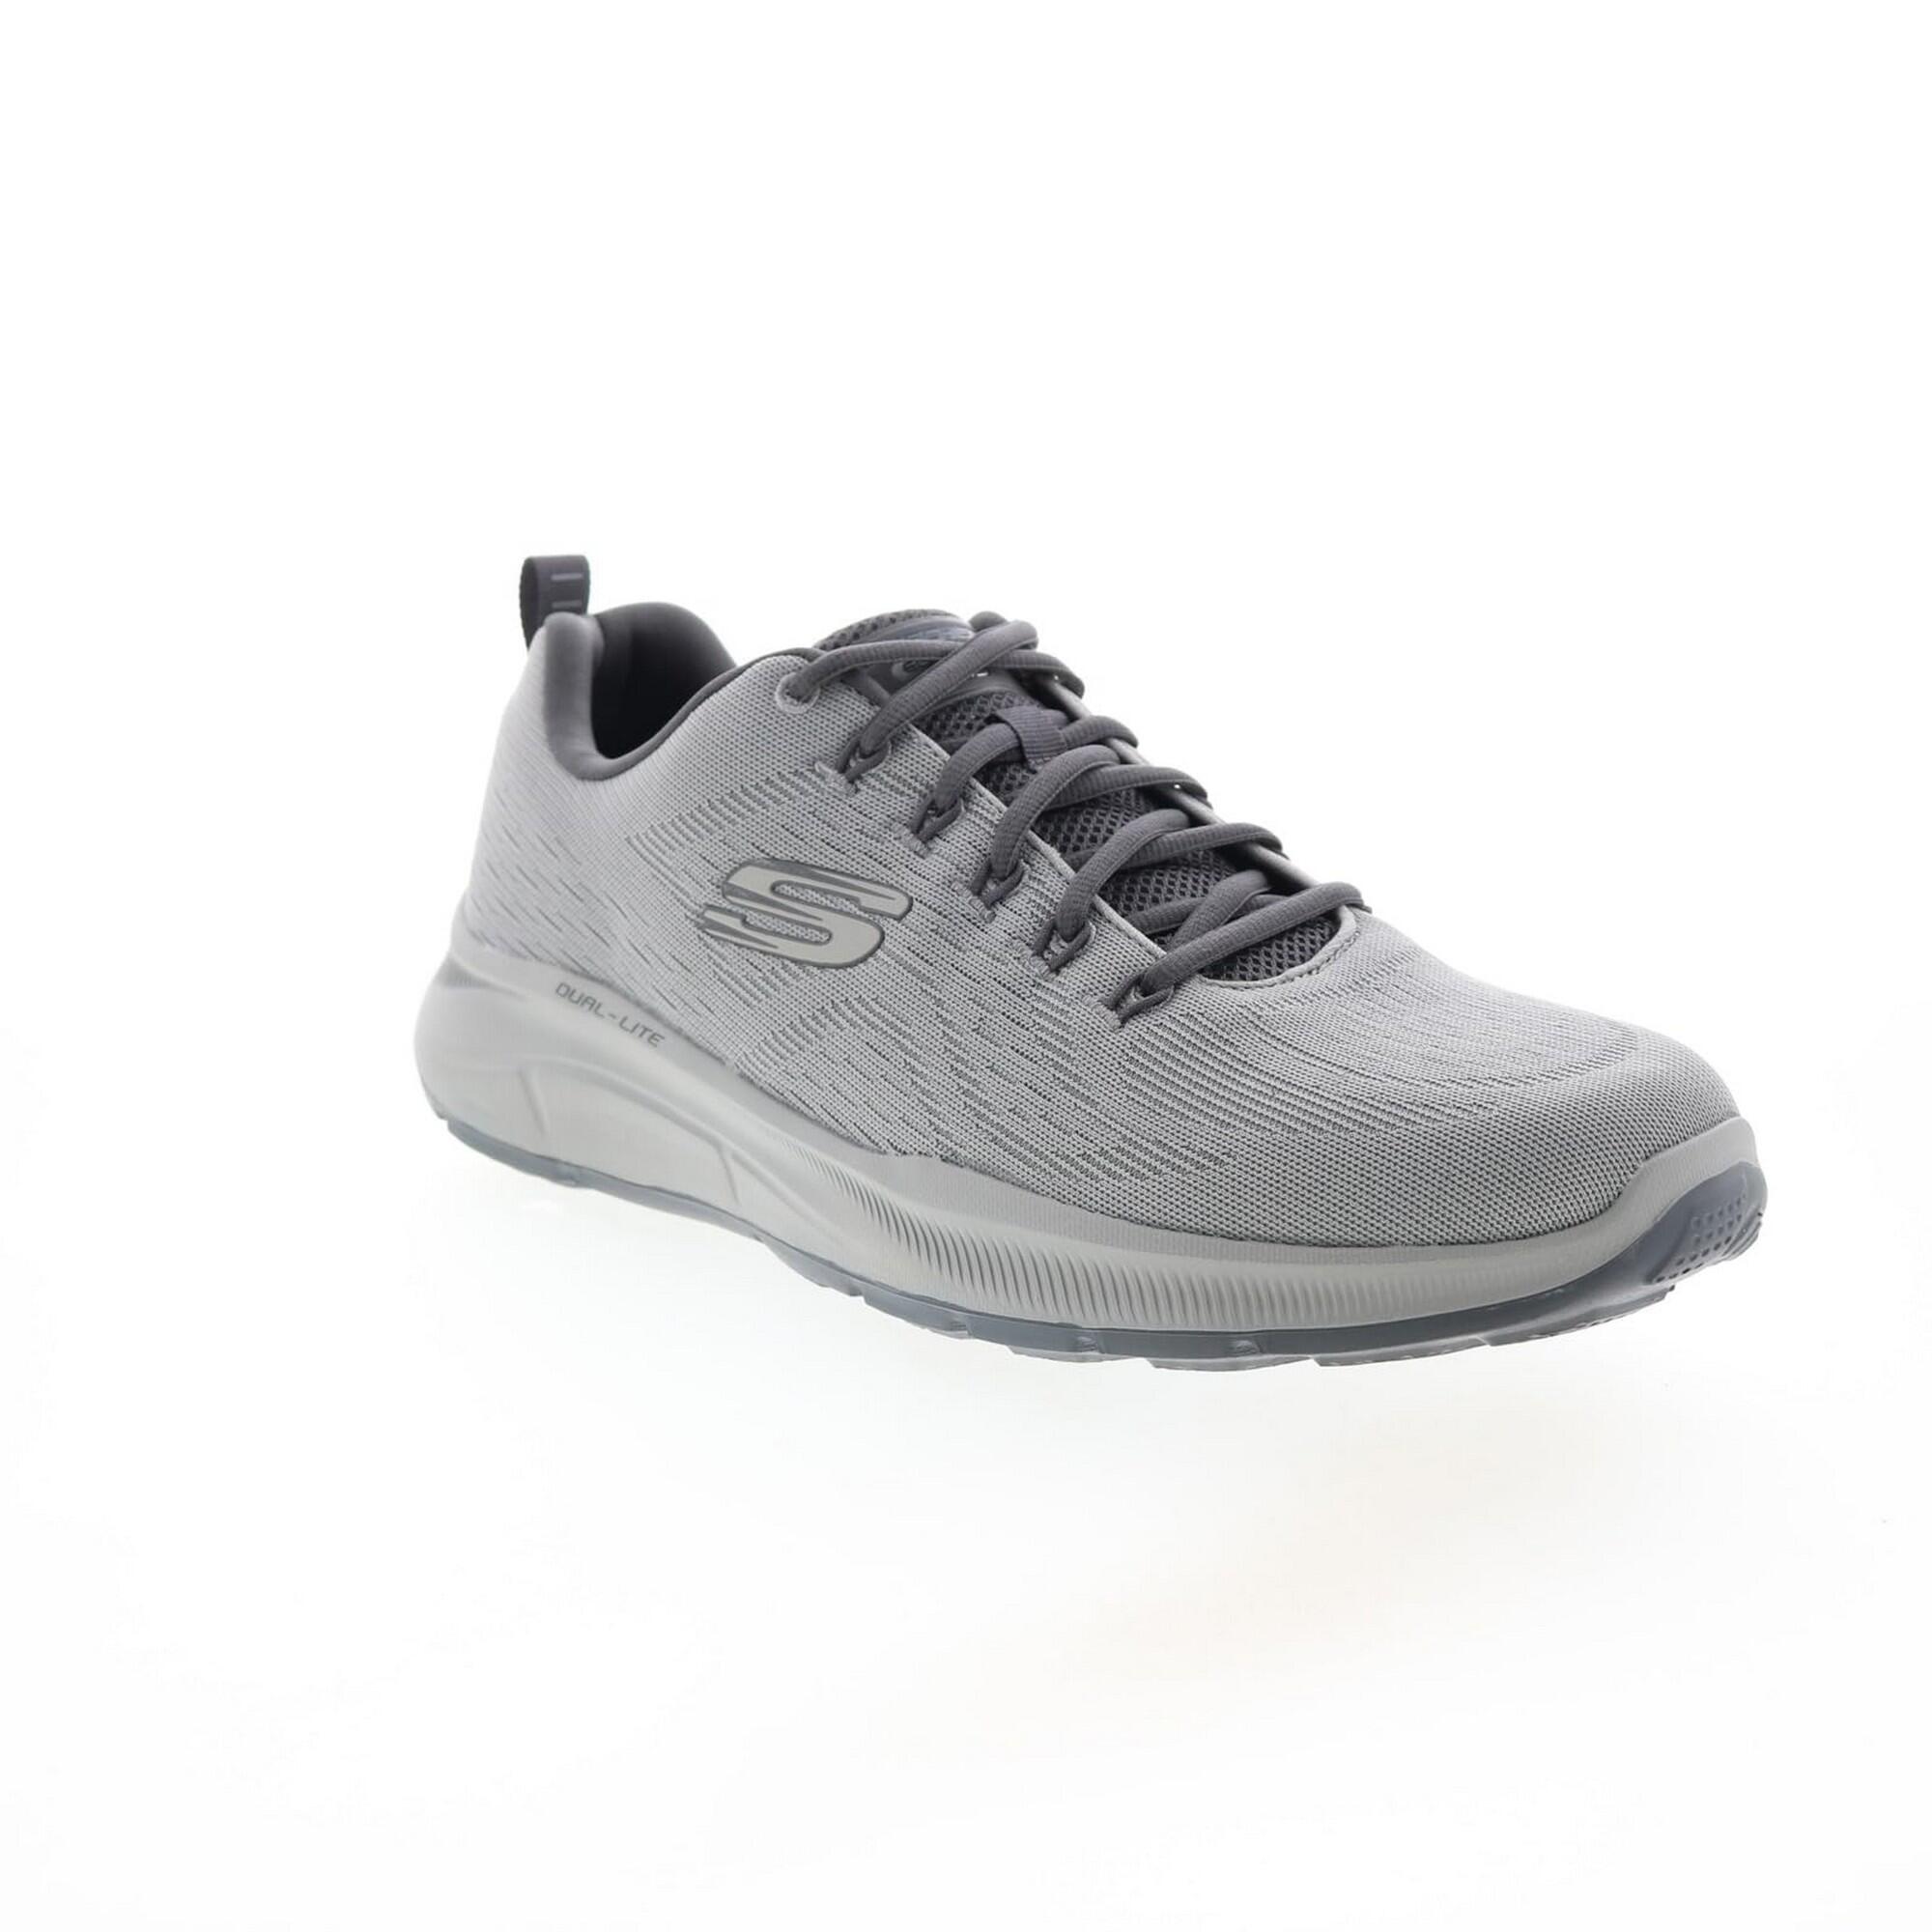 SKECHERS Mens Equalizer 5.0 Trainers (Grey/Charcoal)